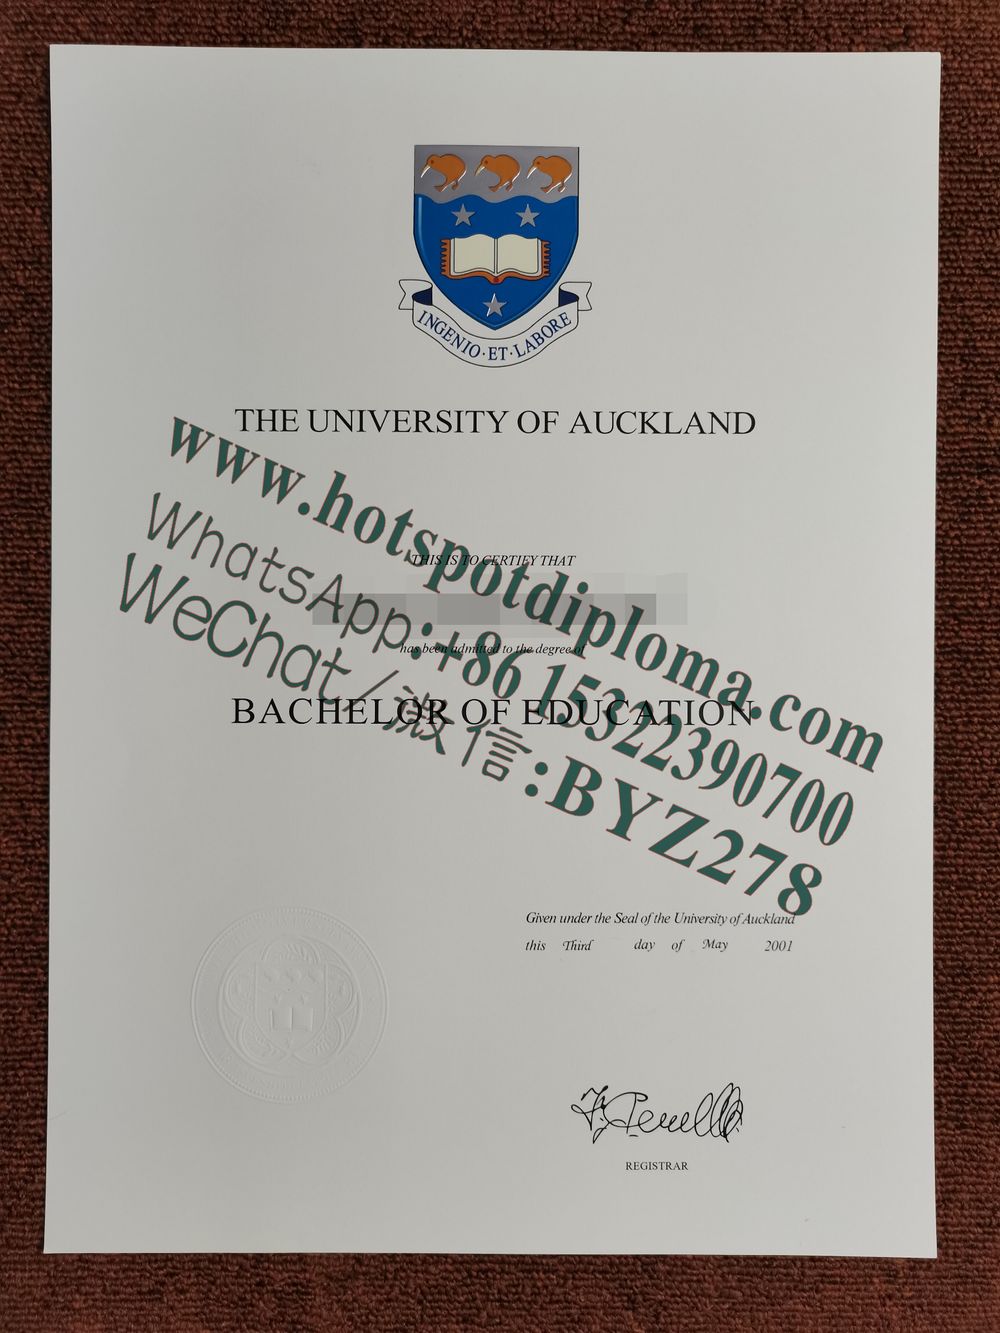 Buy University of Auckland Diploma Online